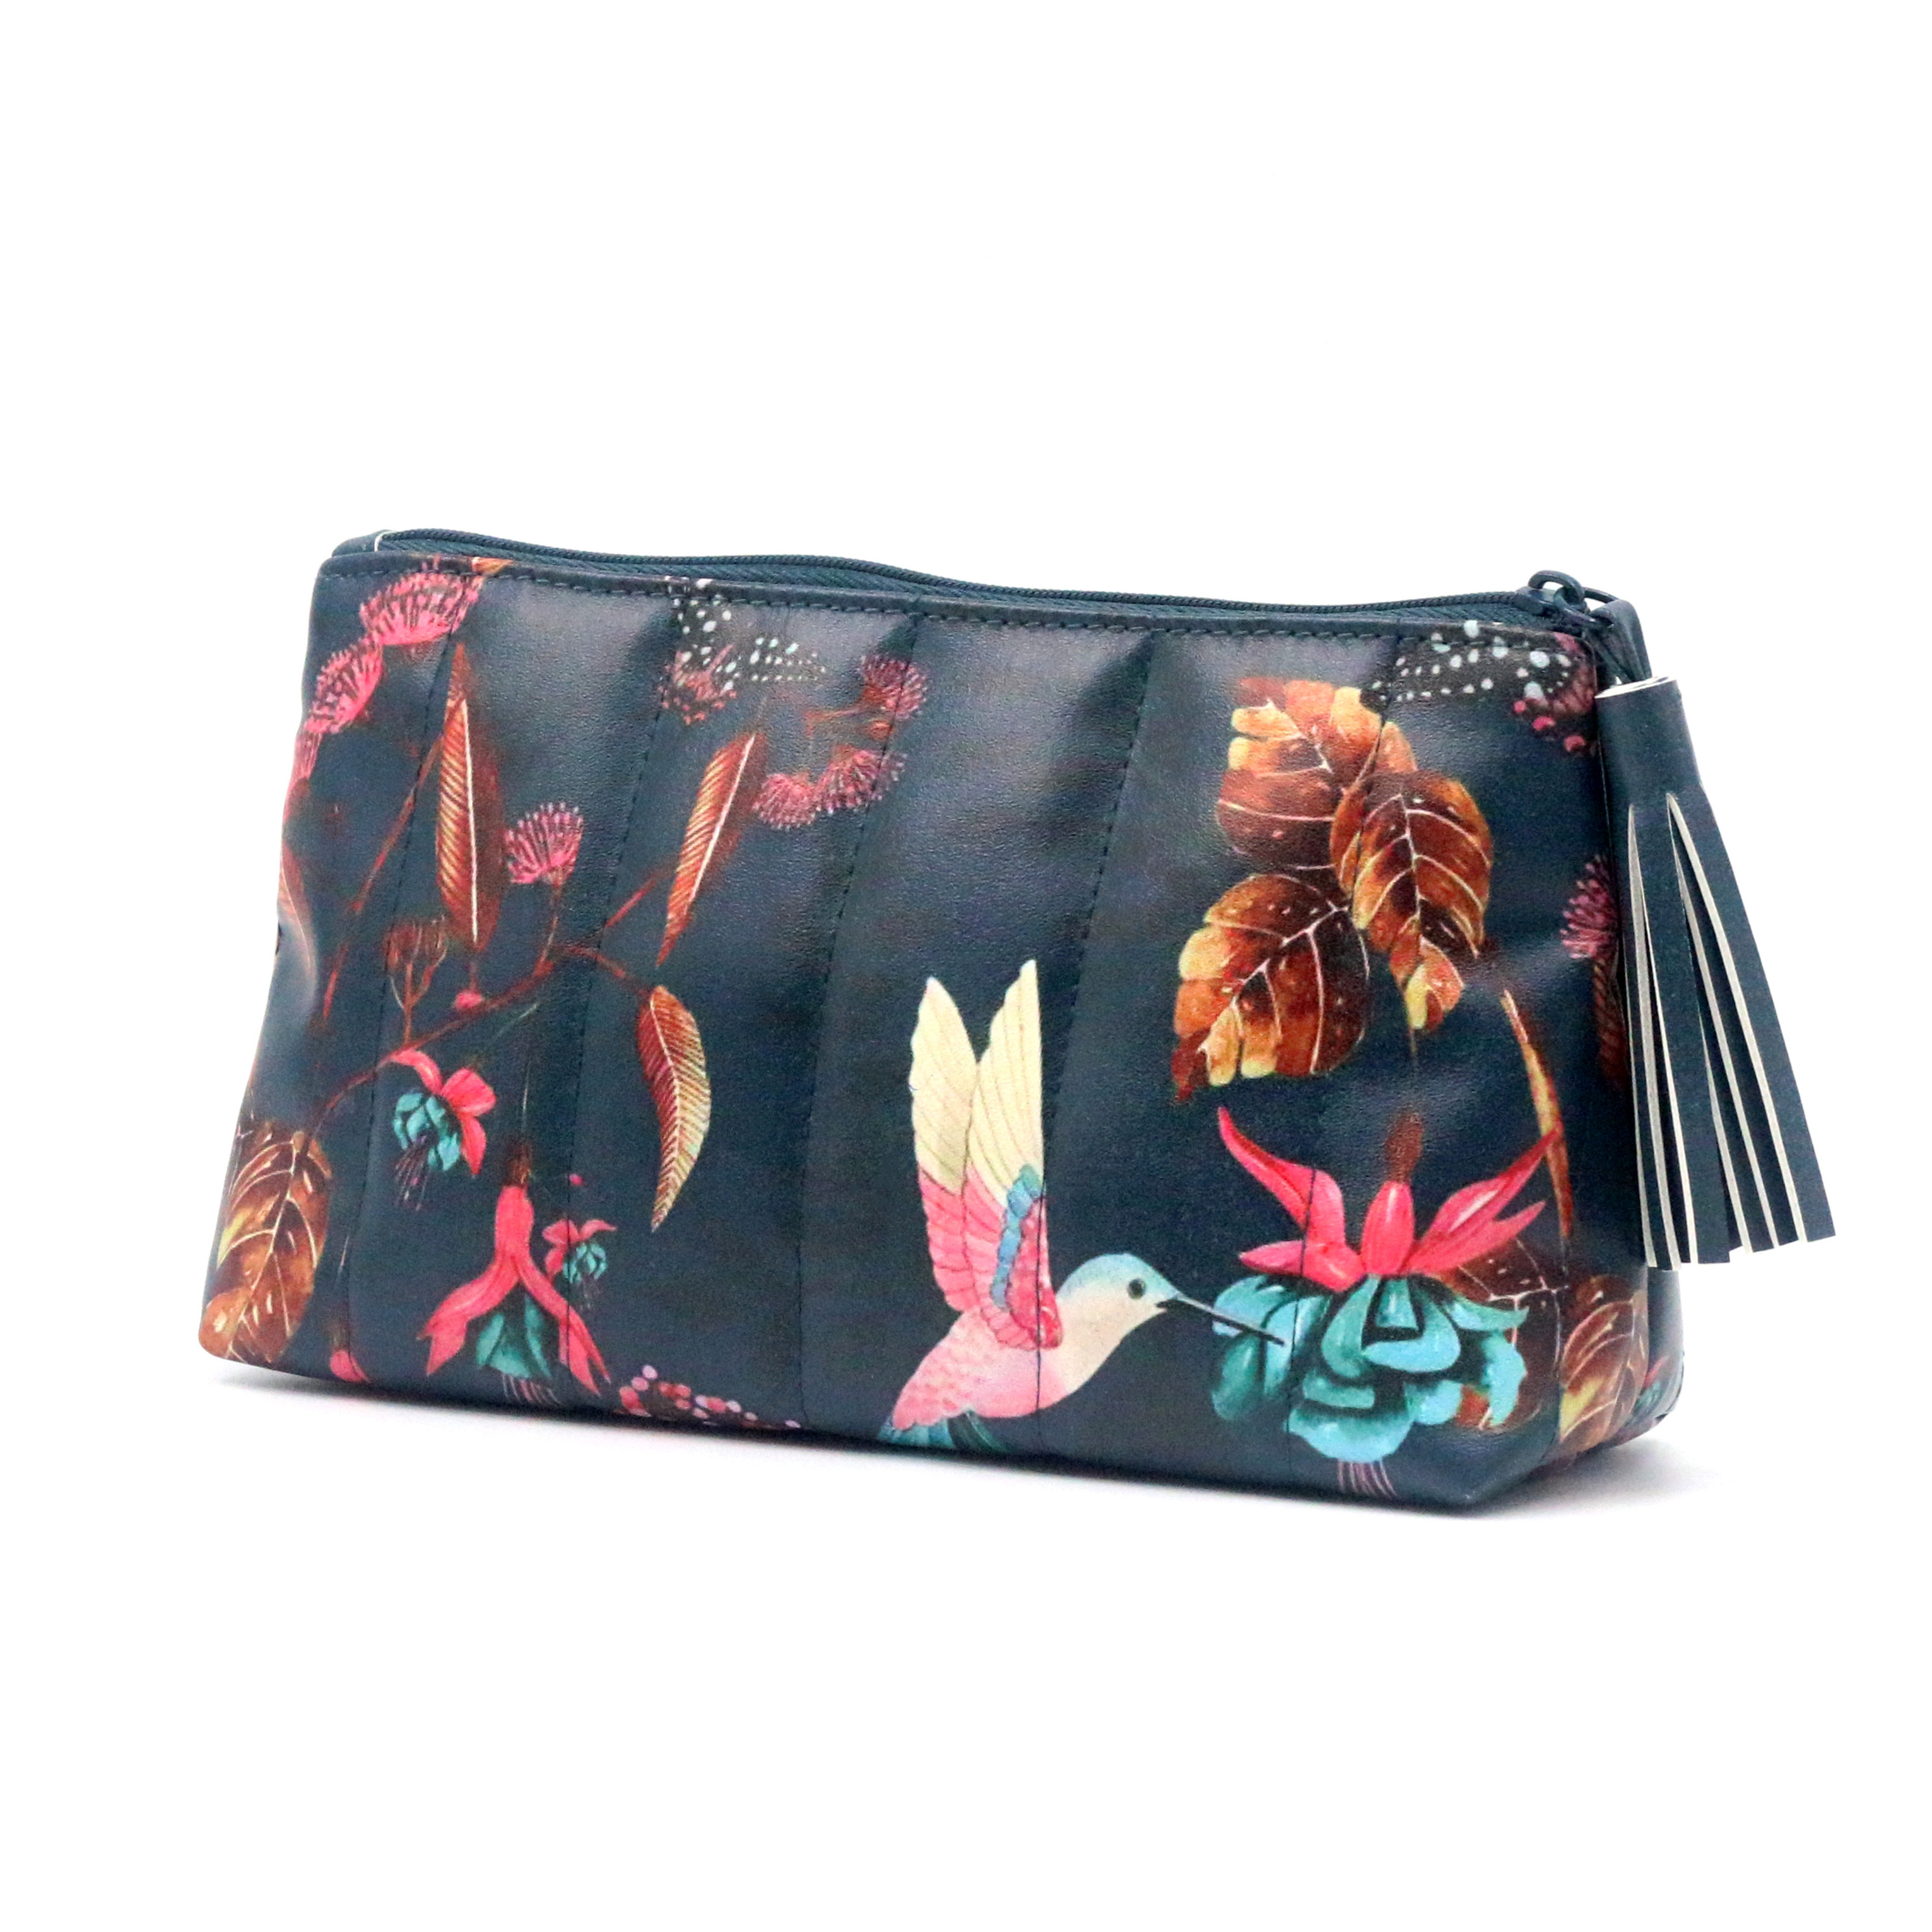 New Products Dark Green PU Quilted Cotton Makeup Bag Floral Birds Pattern Digital Prints Vegan Leather Cosmetic Bag